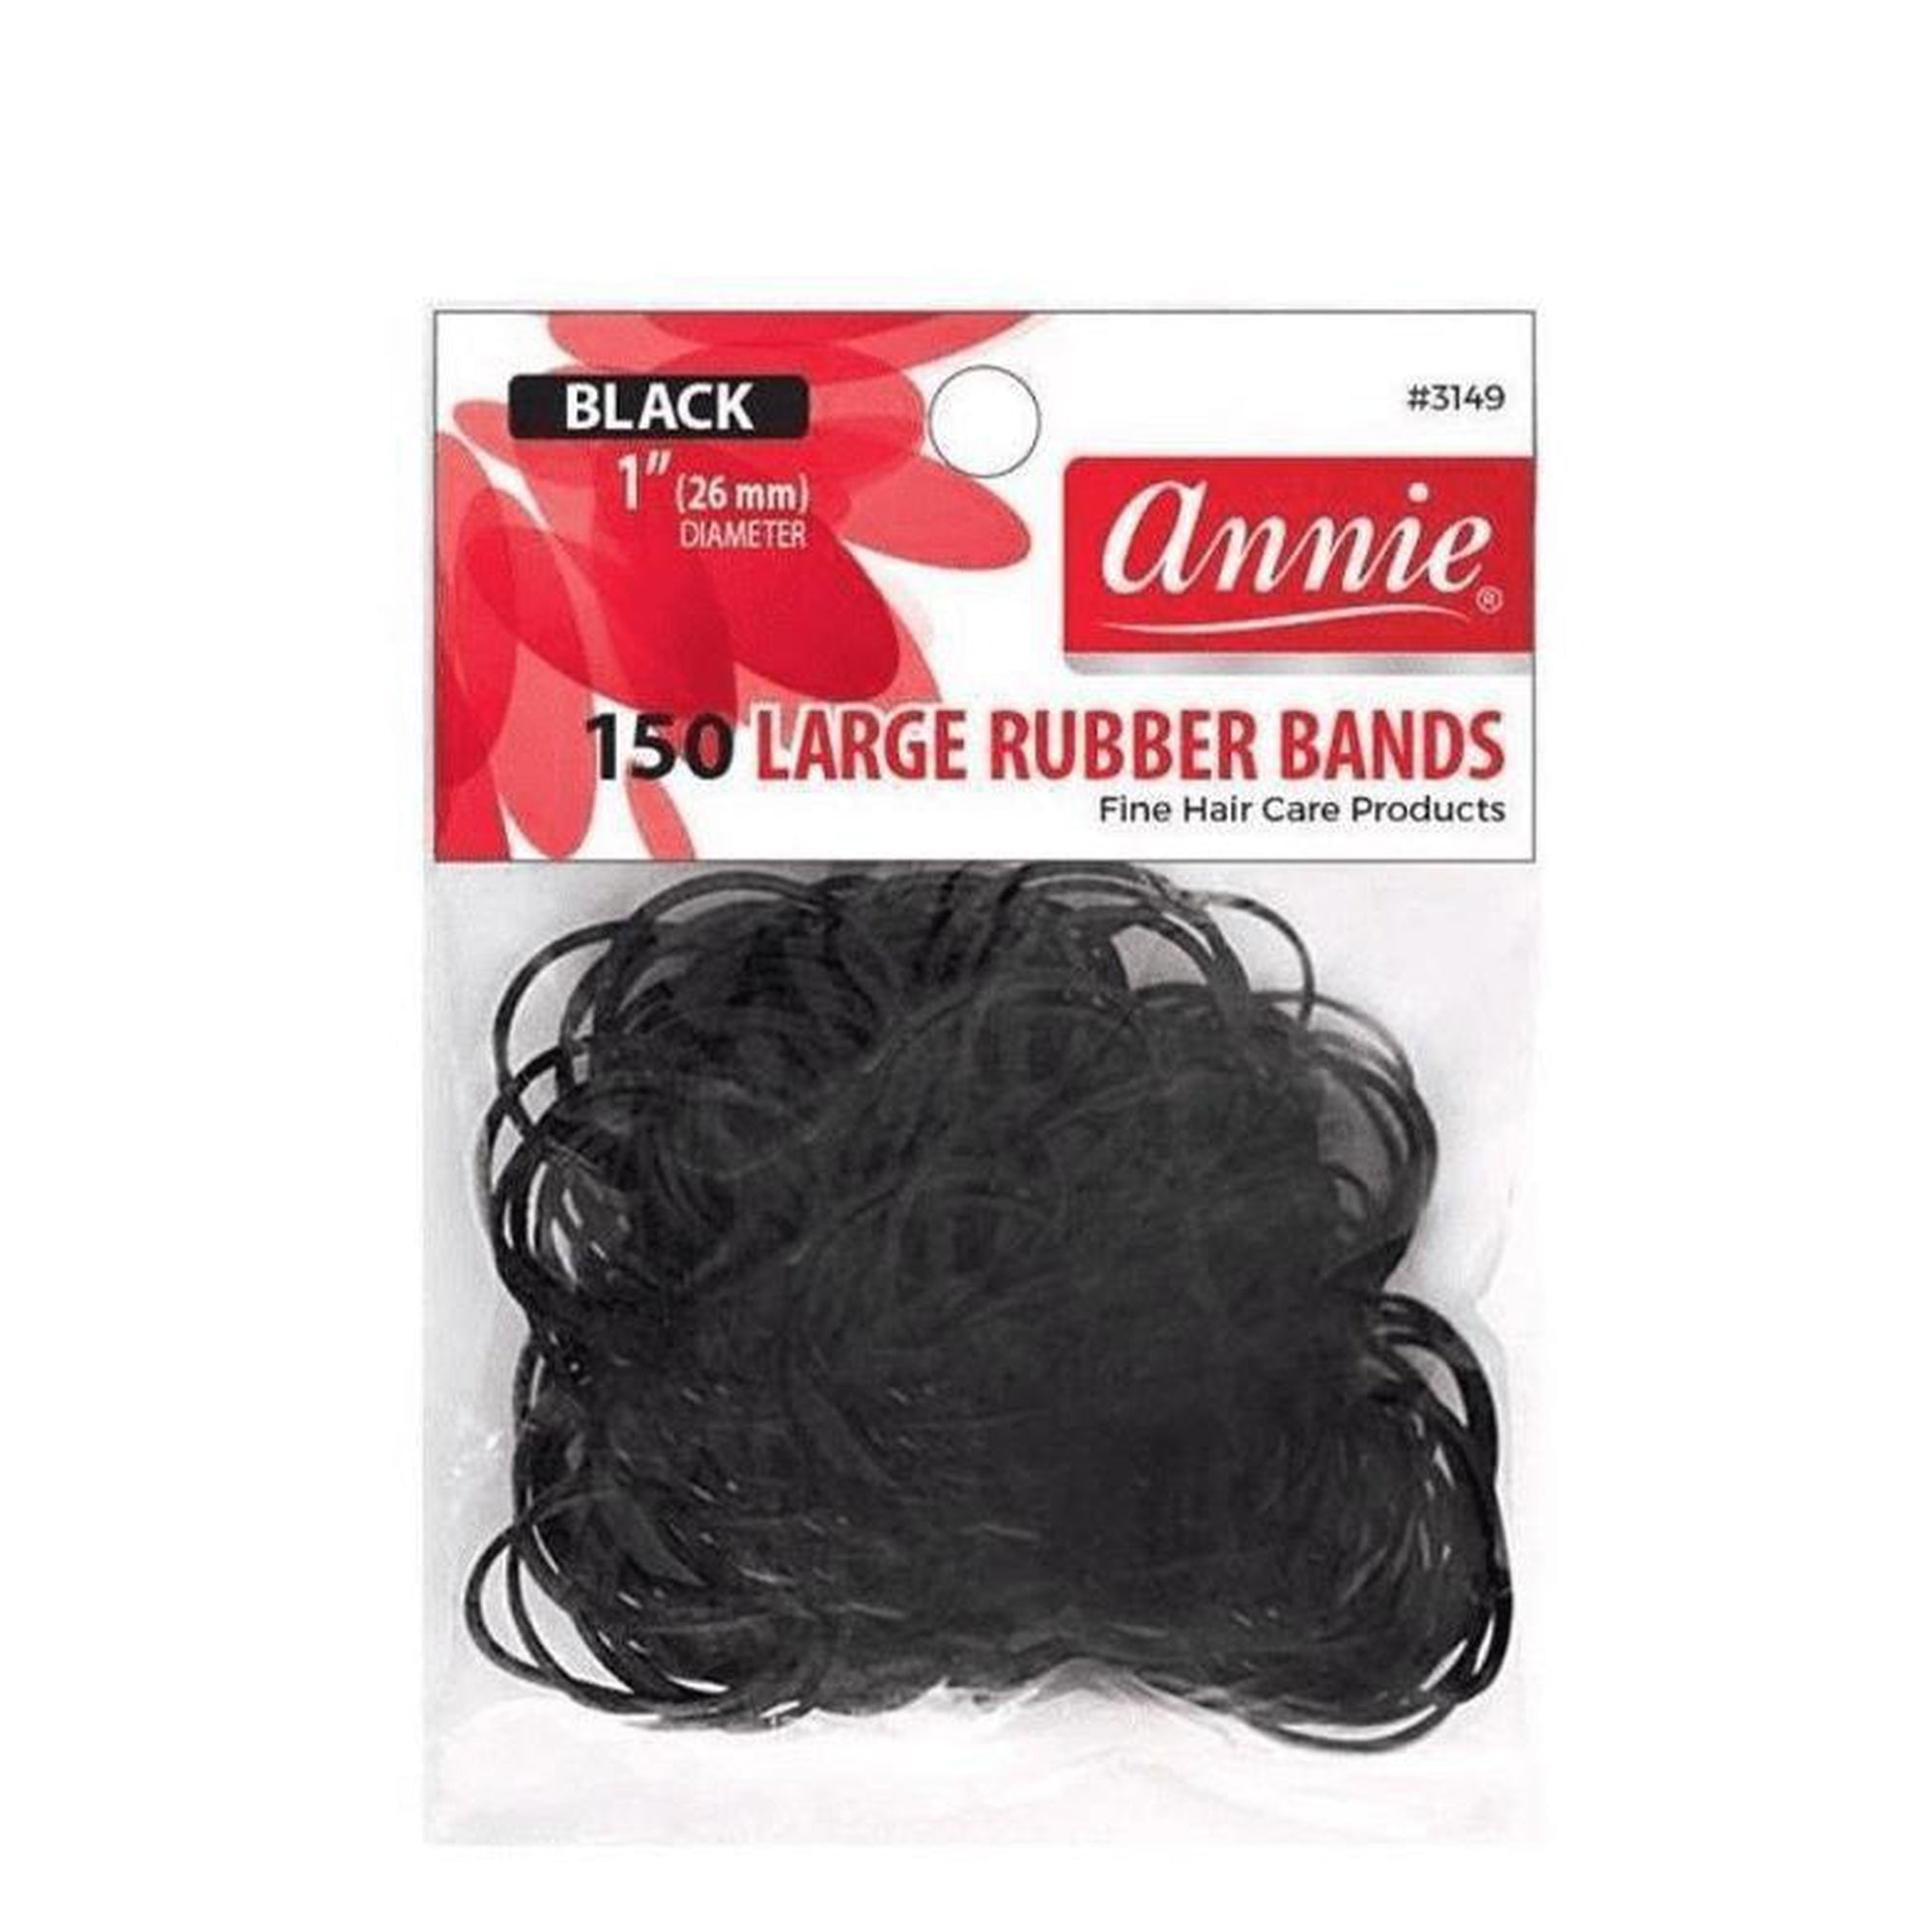 Platinum Rubber 25 Heavy Duty Rubber Bands | Big Thick XL-Large UV Resistant Black Rubber-Bands for Fishing, RC, Elastic Hair Ties + Pro Quality